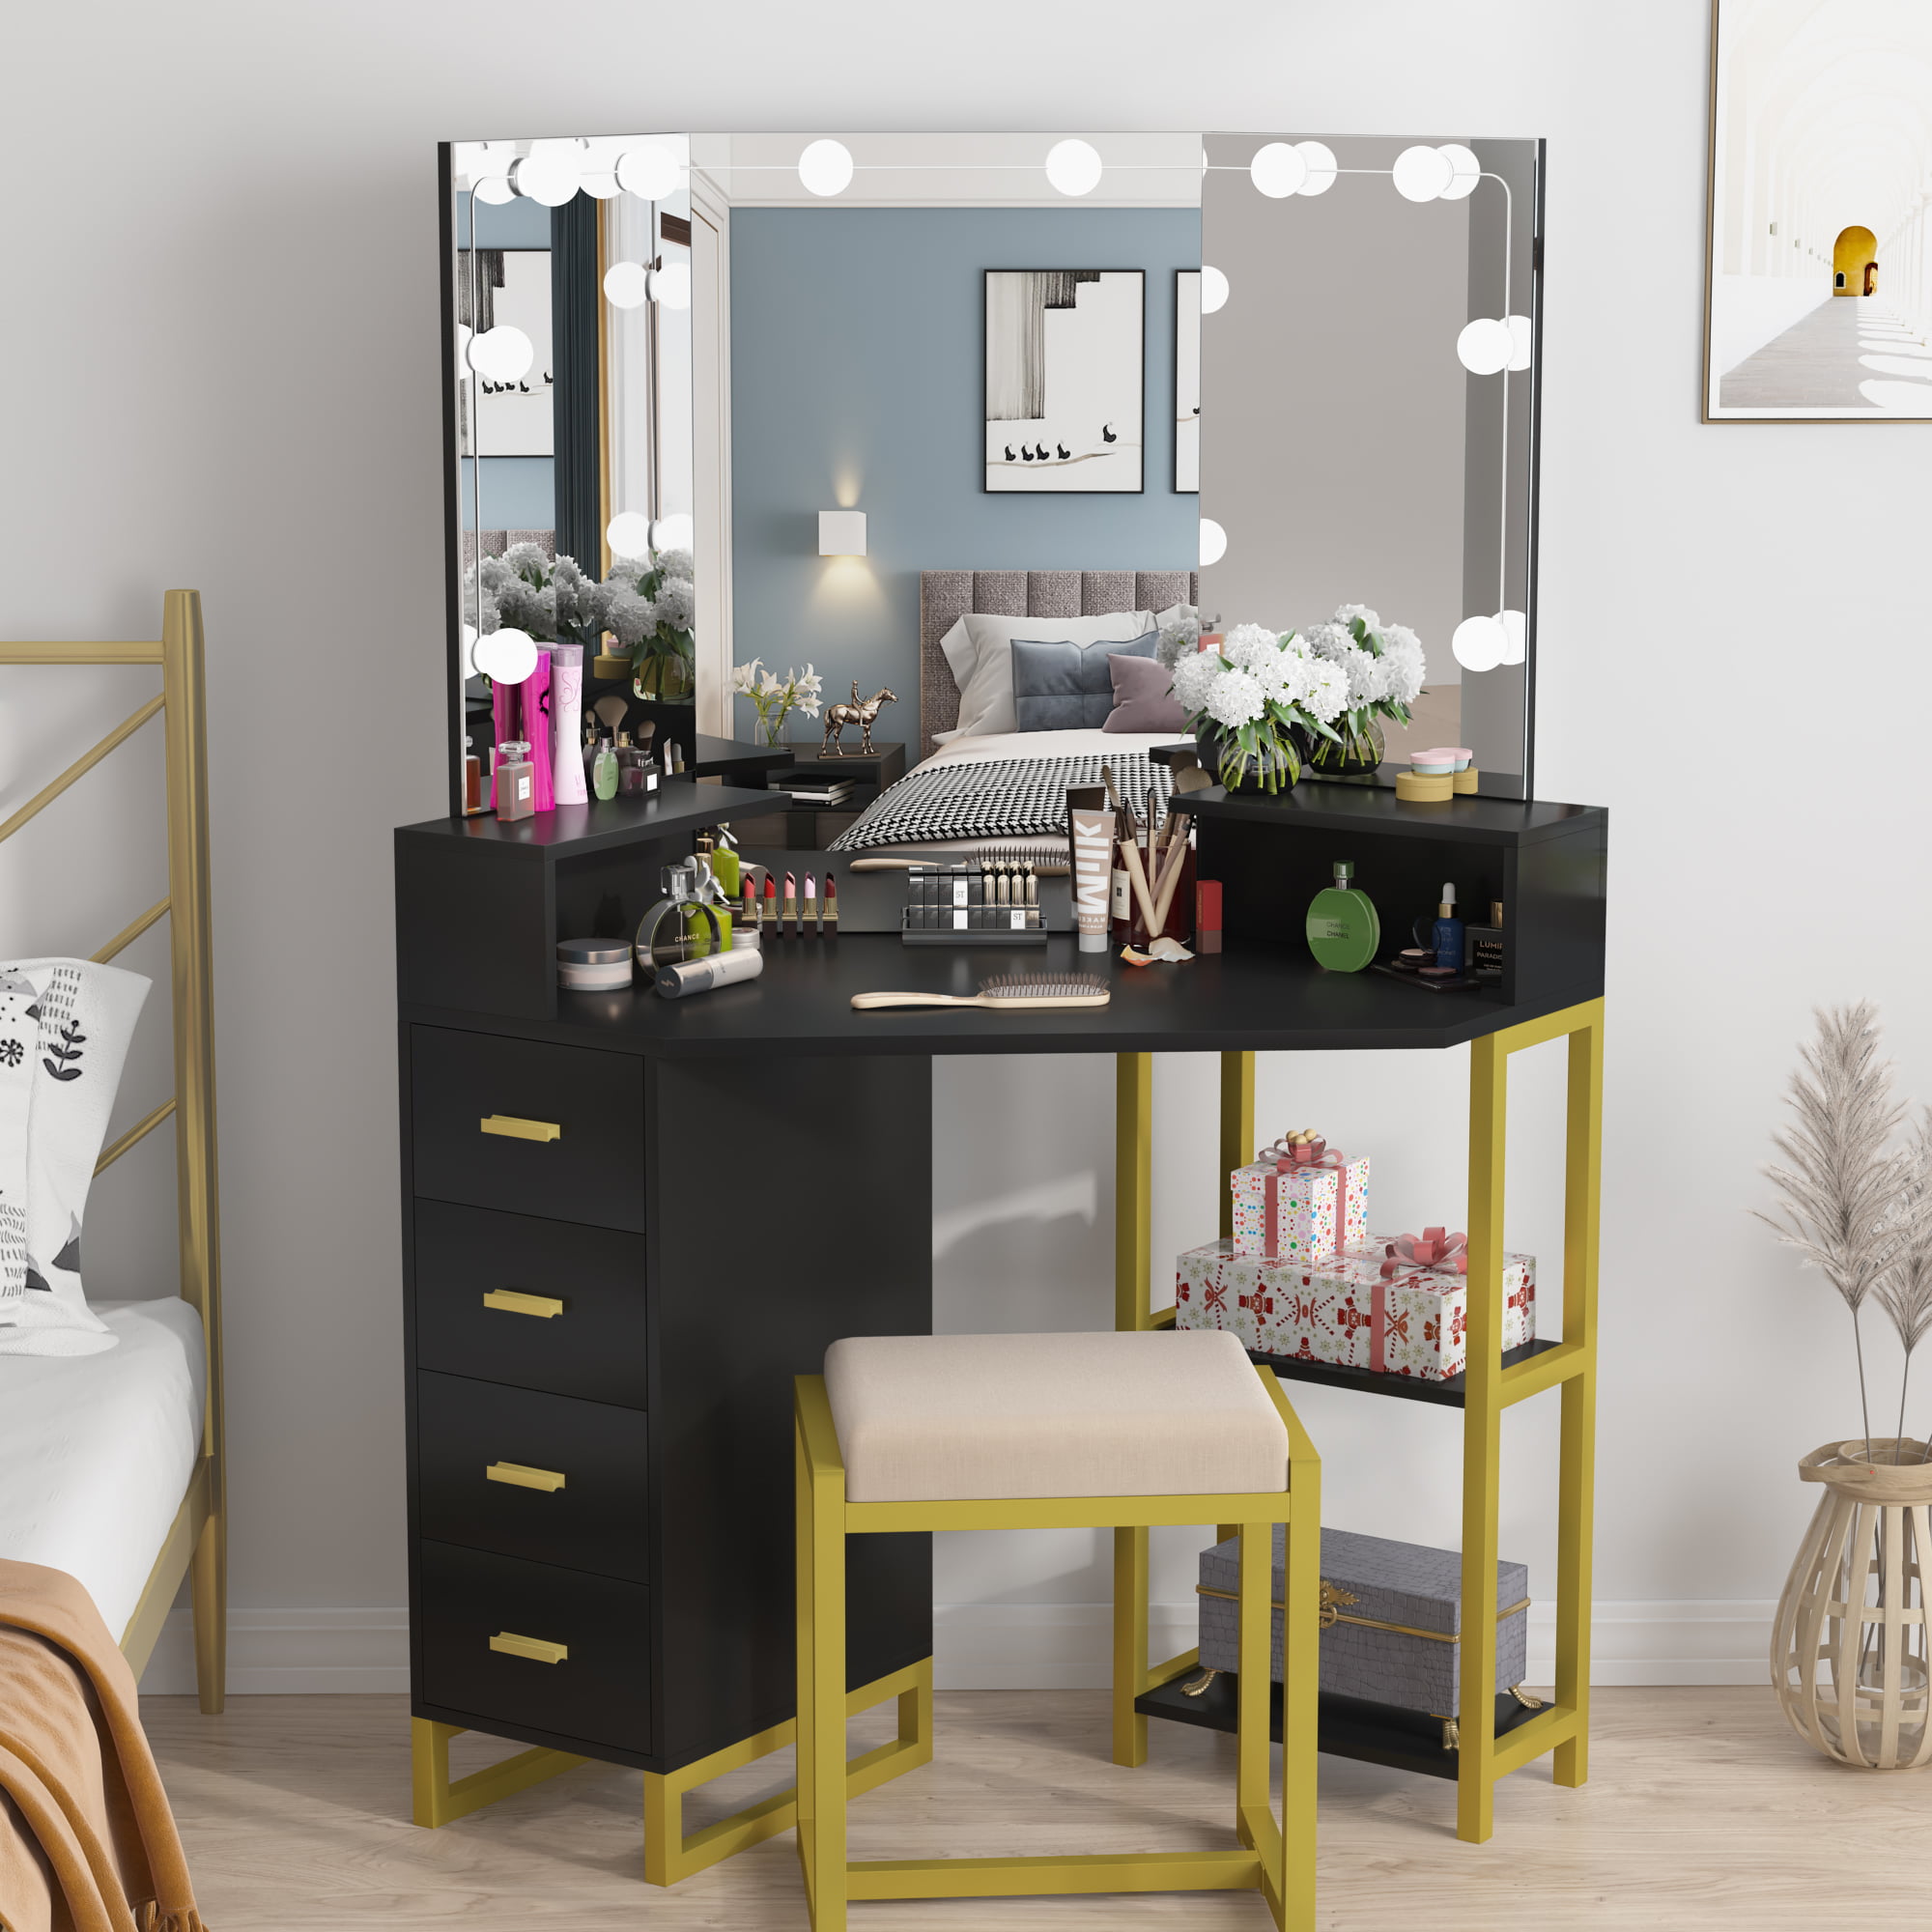 PAKASEPT Vanity Desk with Mirror and Lights in 3Colors, Makeup Vanity with  Charging Station, Makeup Desk Dressing Table with Tri-fold Mirror Hidden  Storage Shelves&5 Drawers, White 